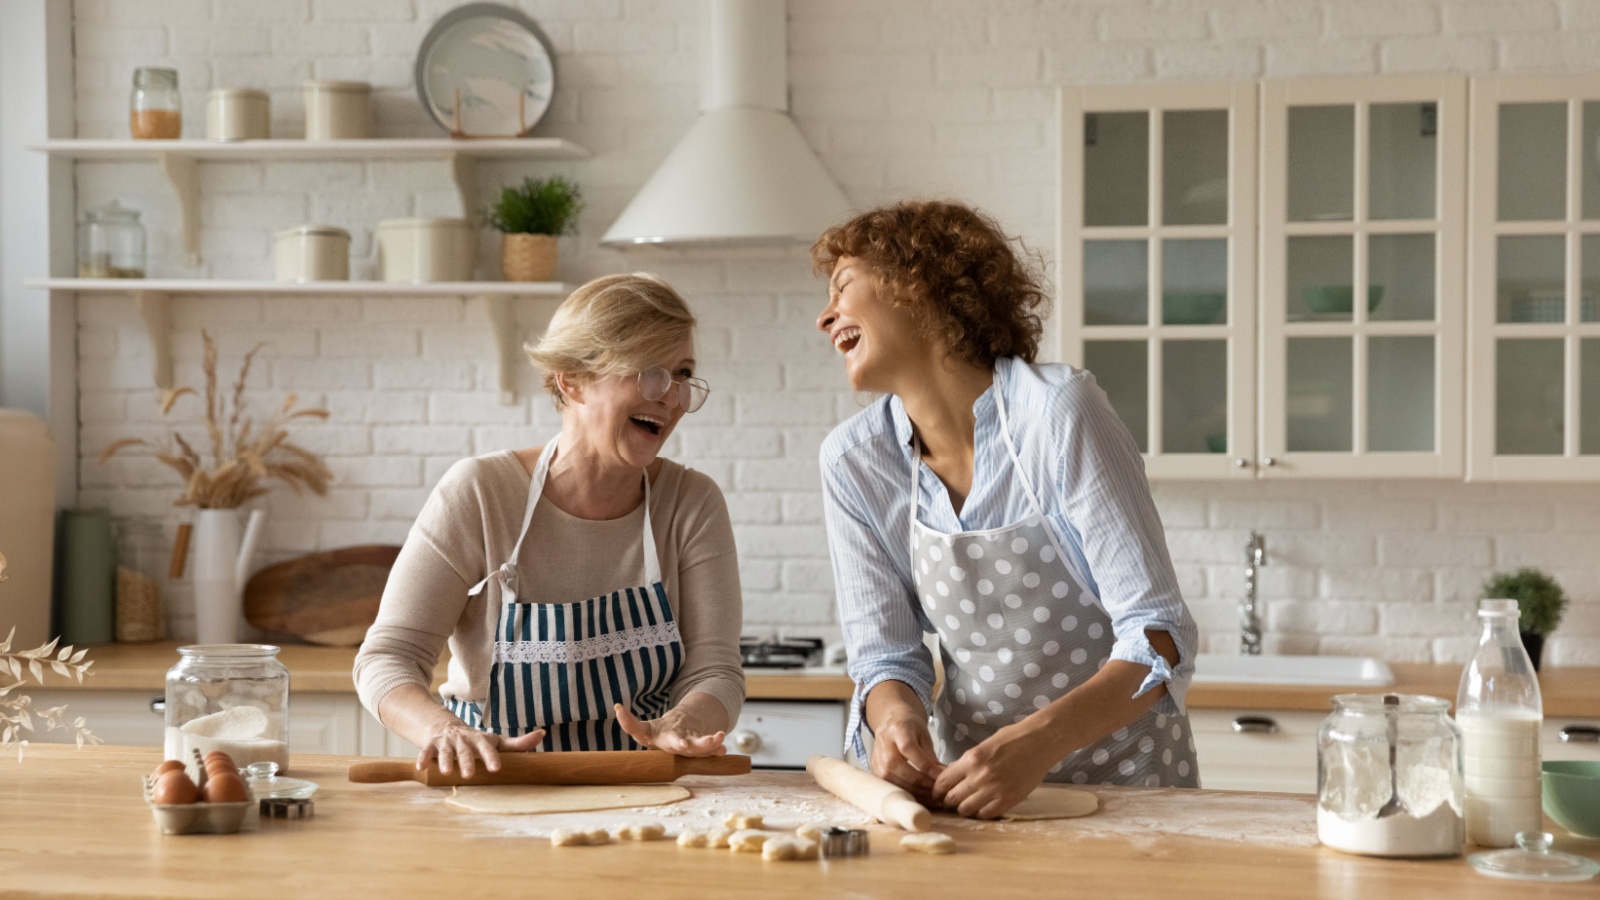 Warm relations. Happy old woman mother pensioner young female daughter grown up kid engaged in baking cookies roll dough at kitchen together laugh have fun. Elderly lady enjoy cooking with adult child, learning new skills